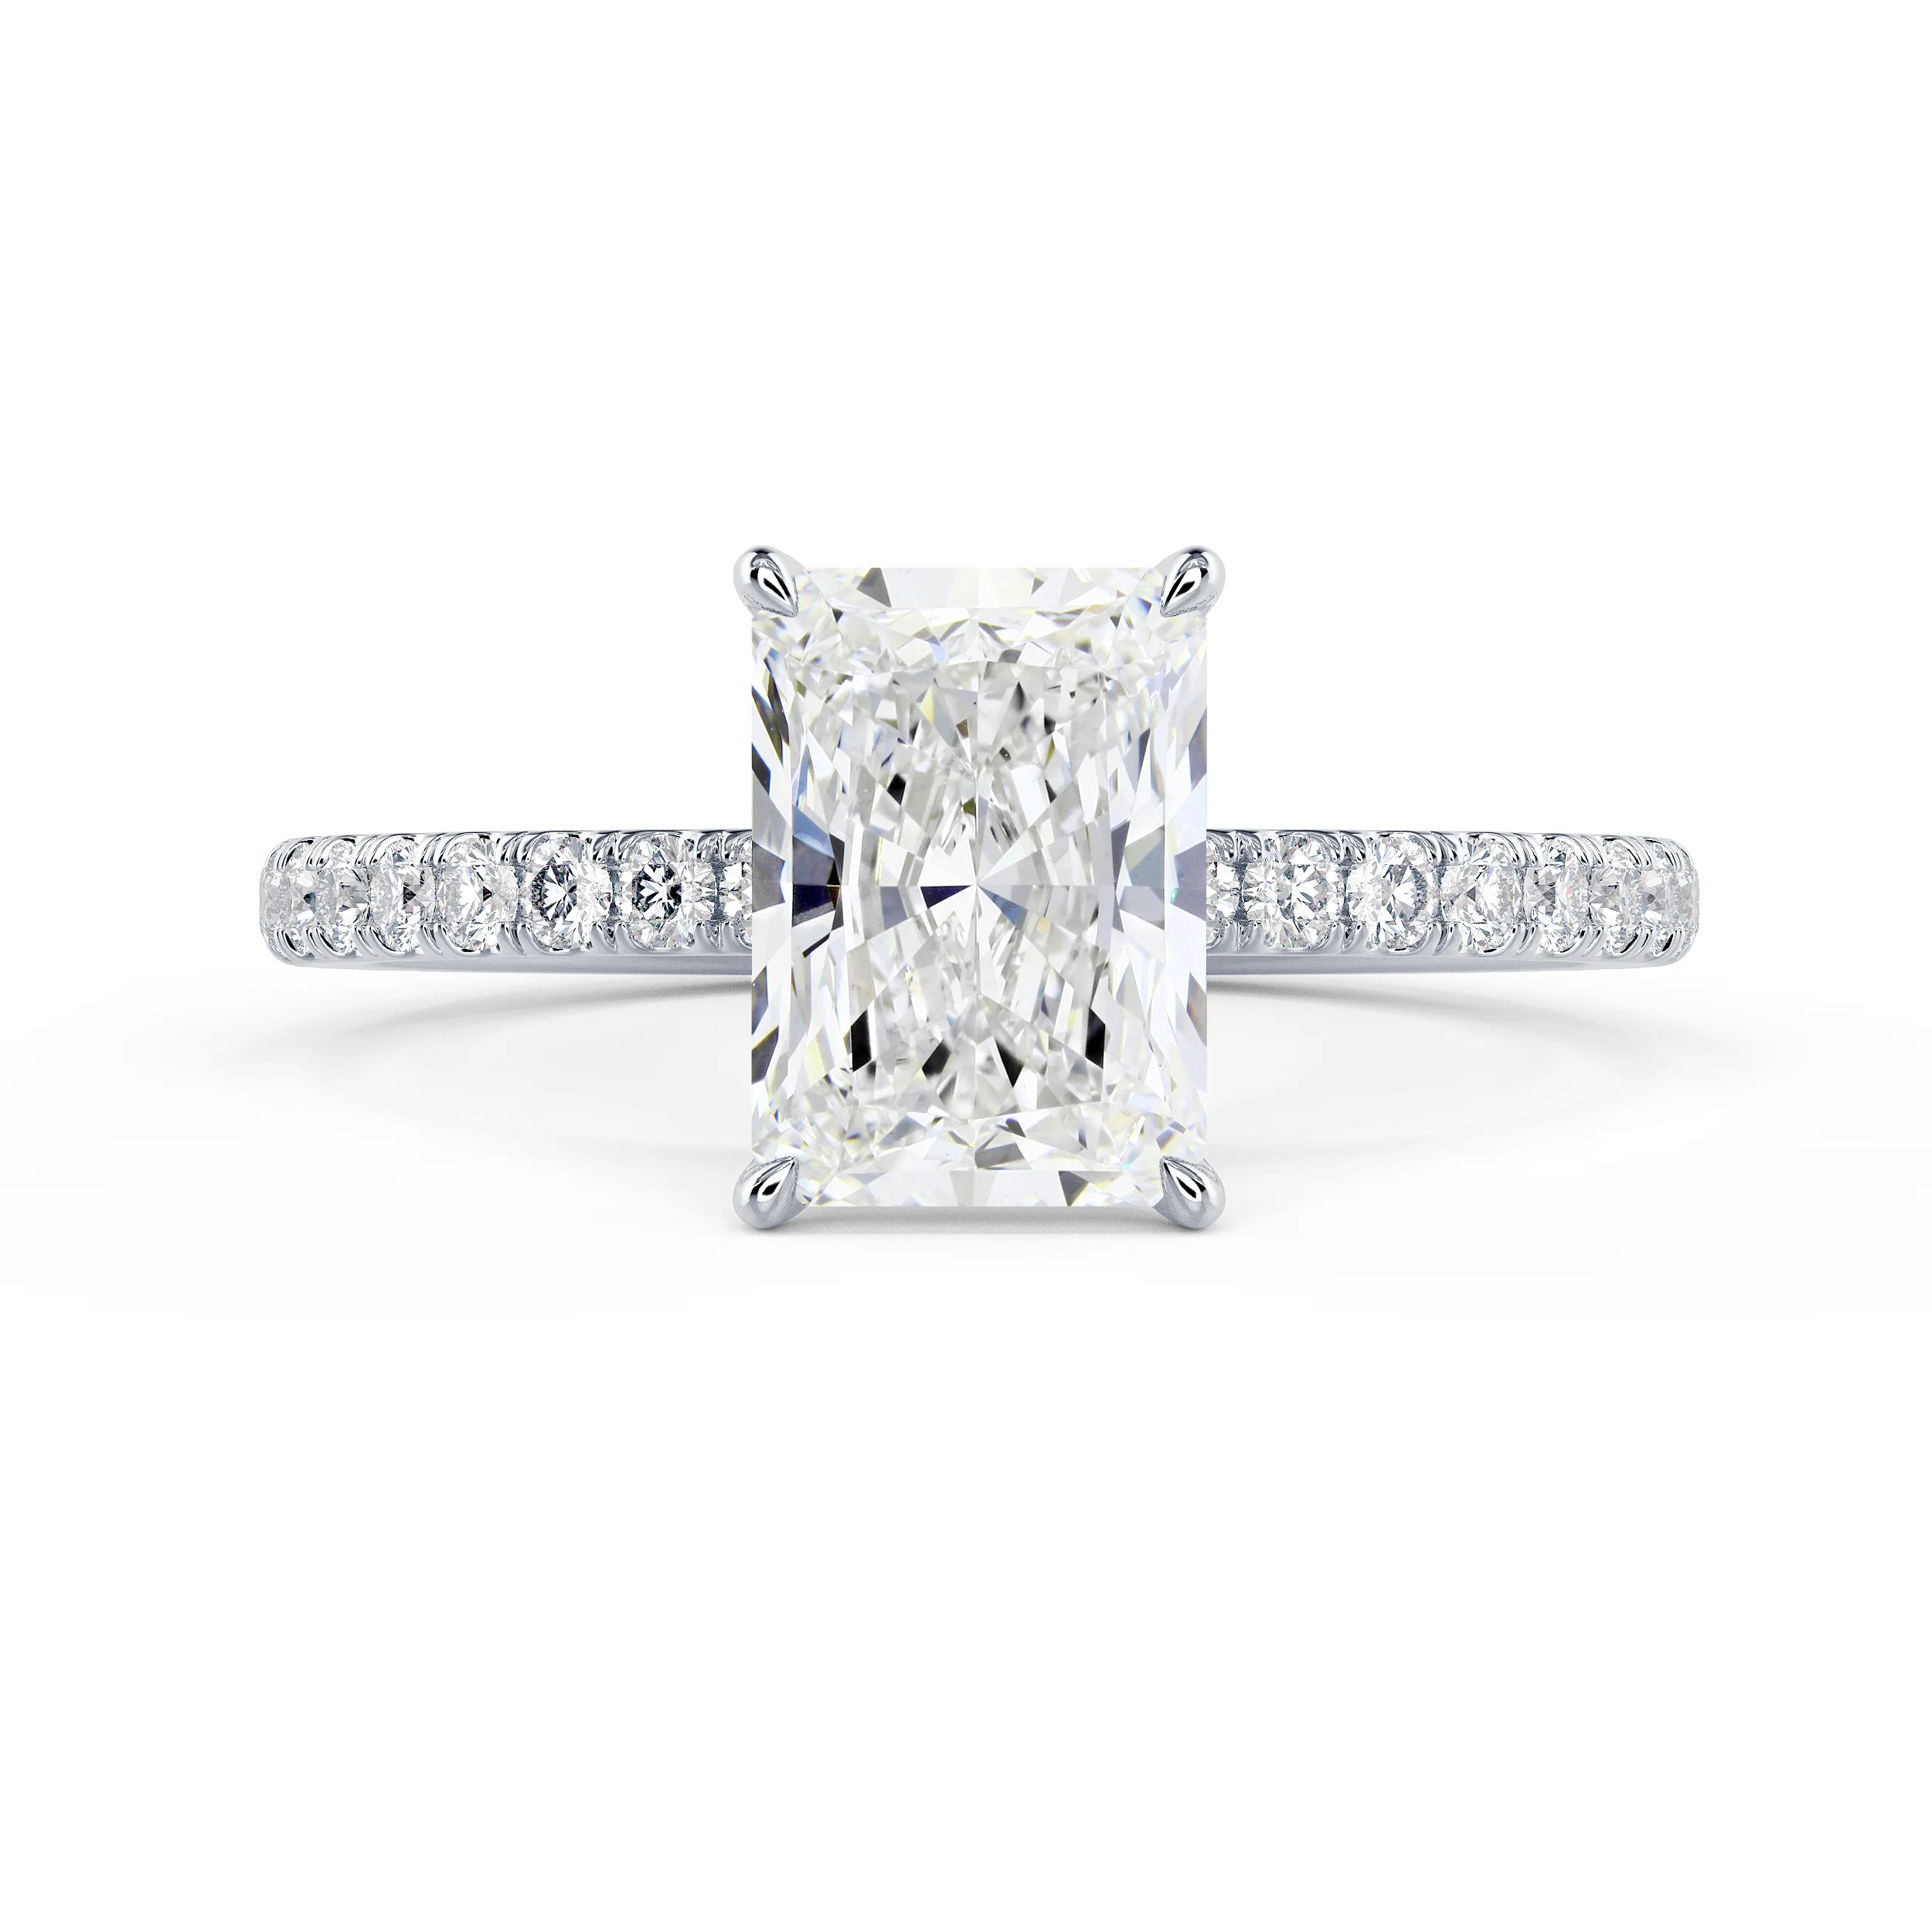 Synthetic Diamonds Radiant Petite Four Prong Pavé Setting in White Gold (Main View)